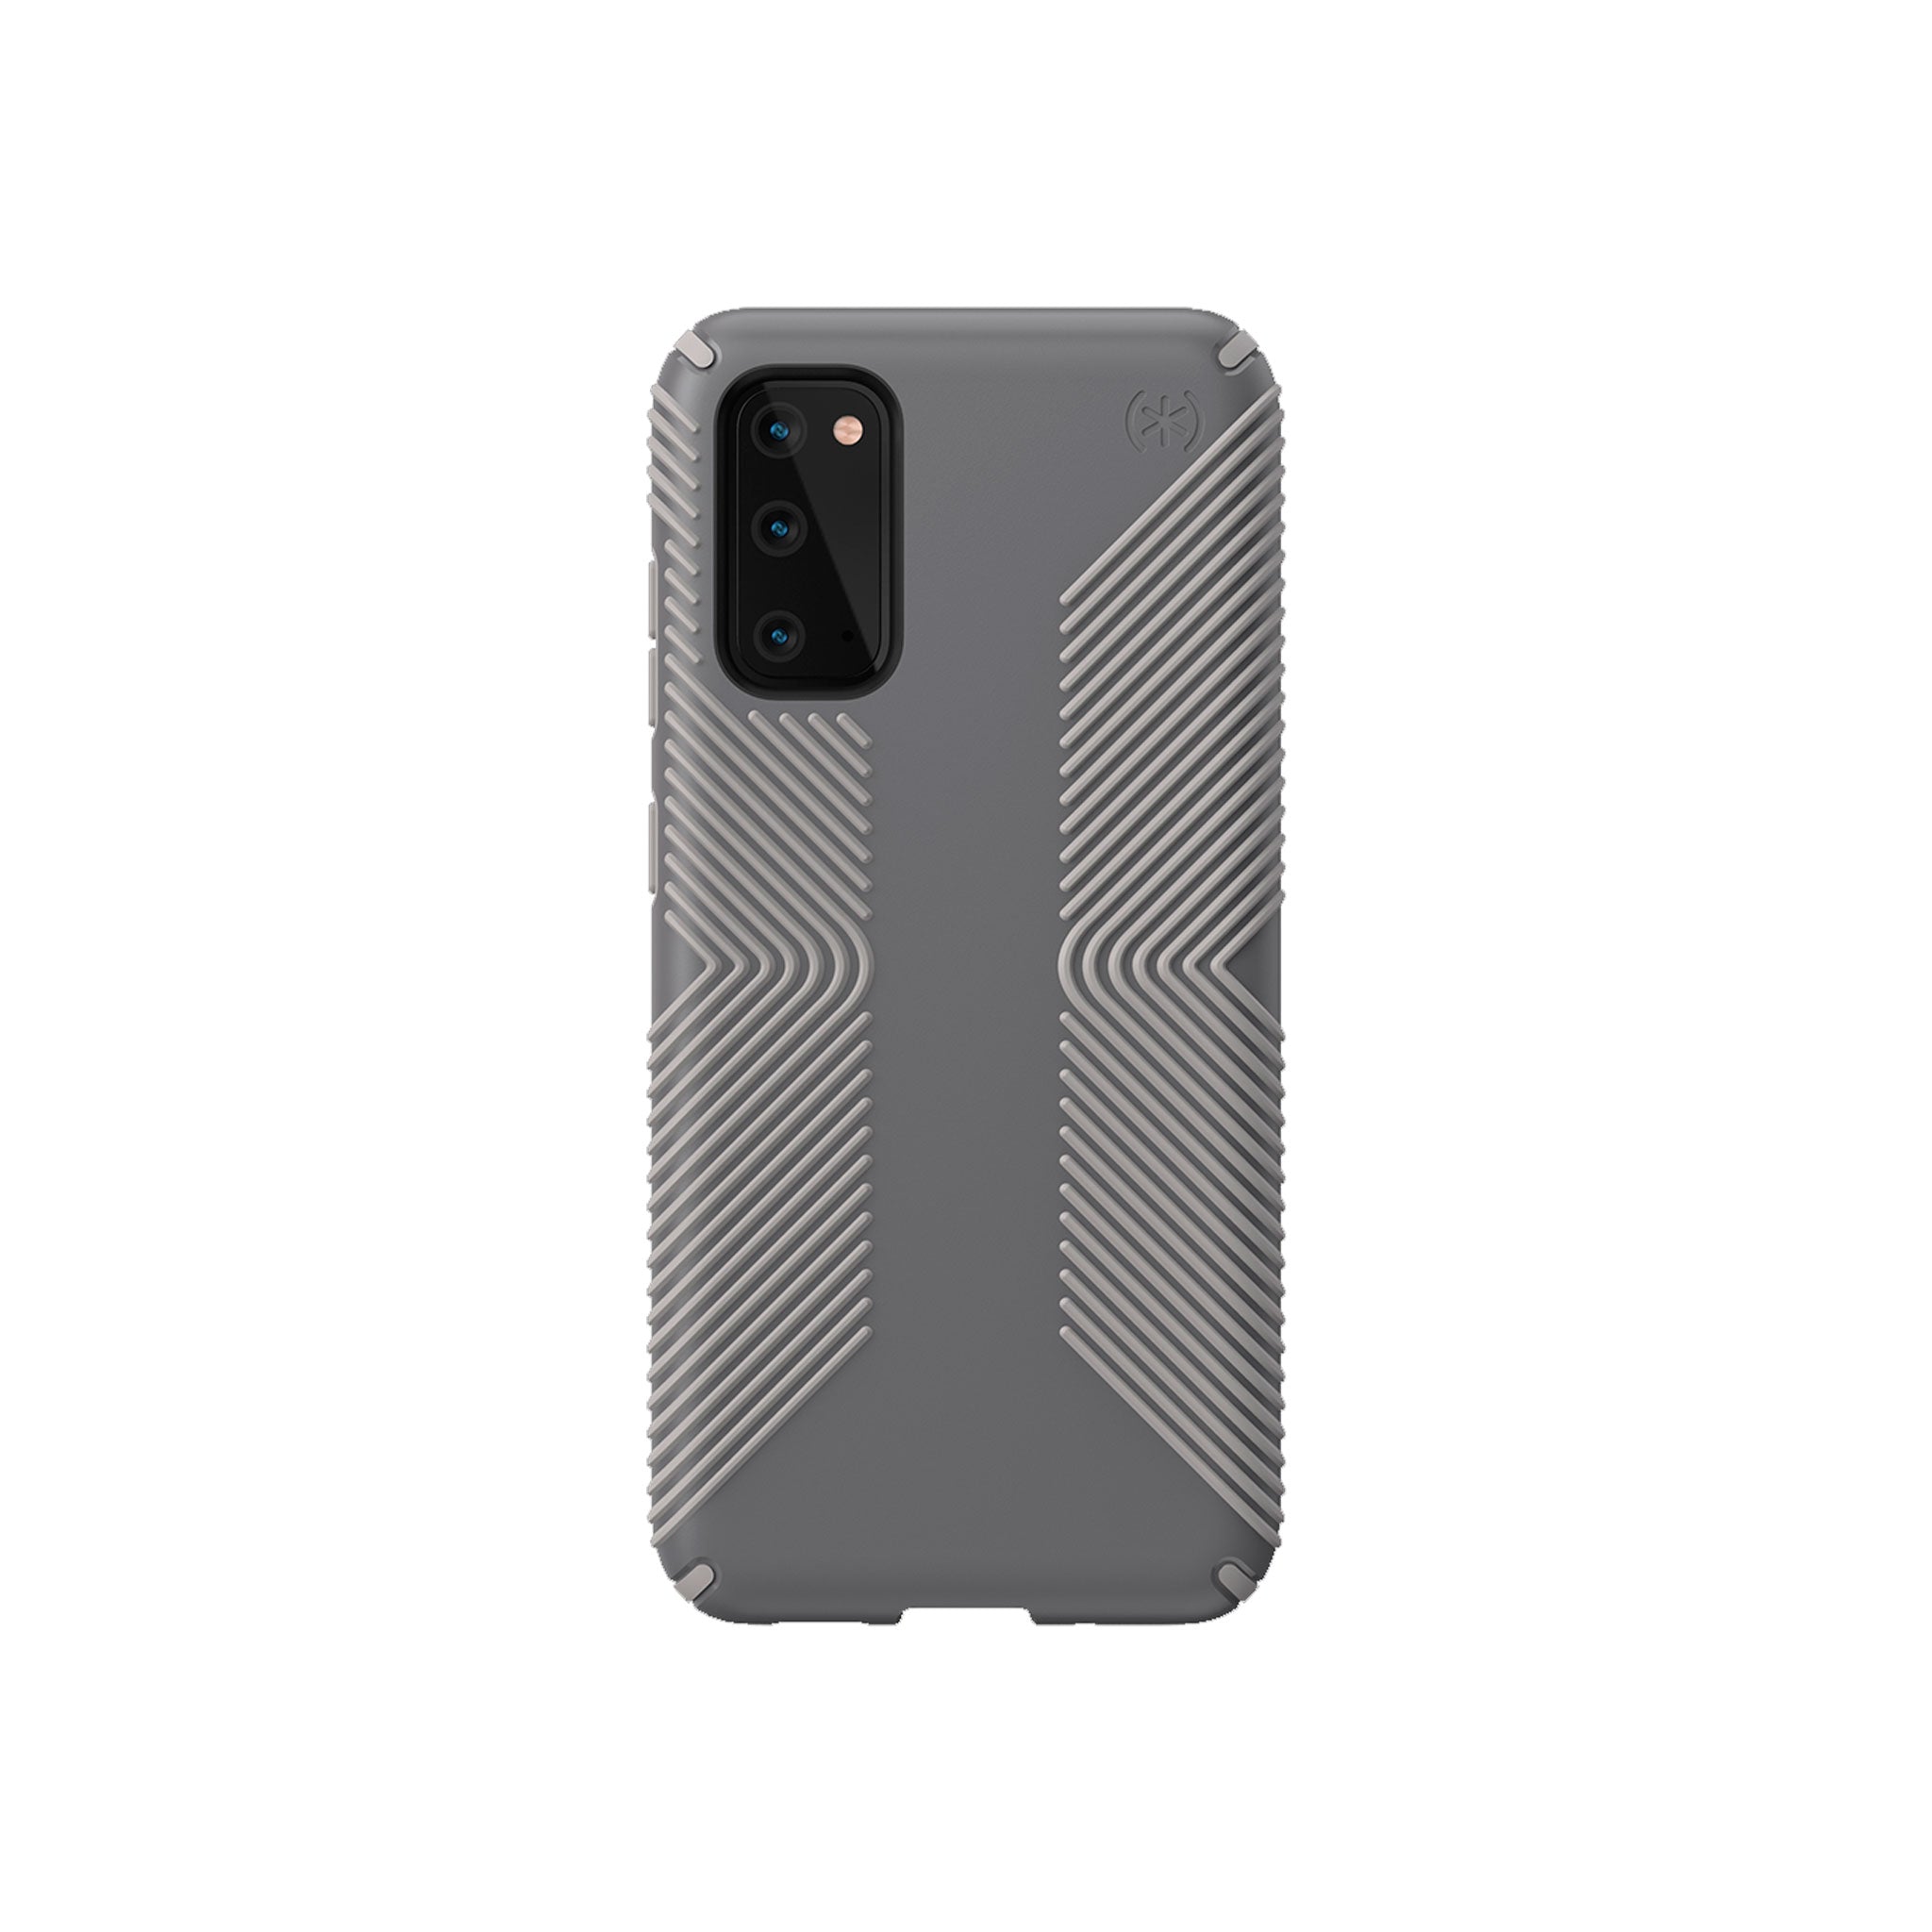 Speck - Presidio2 Grip Case For Samsung Galaxy S20 / S20 5g Uw - Graphite Gray And Cathedral Gray